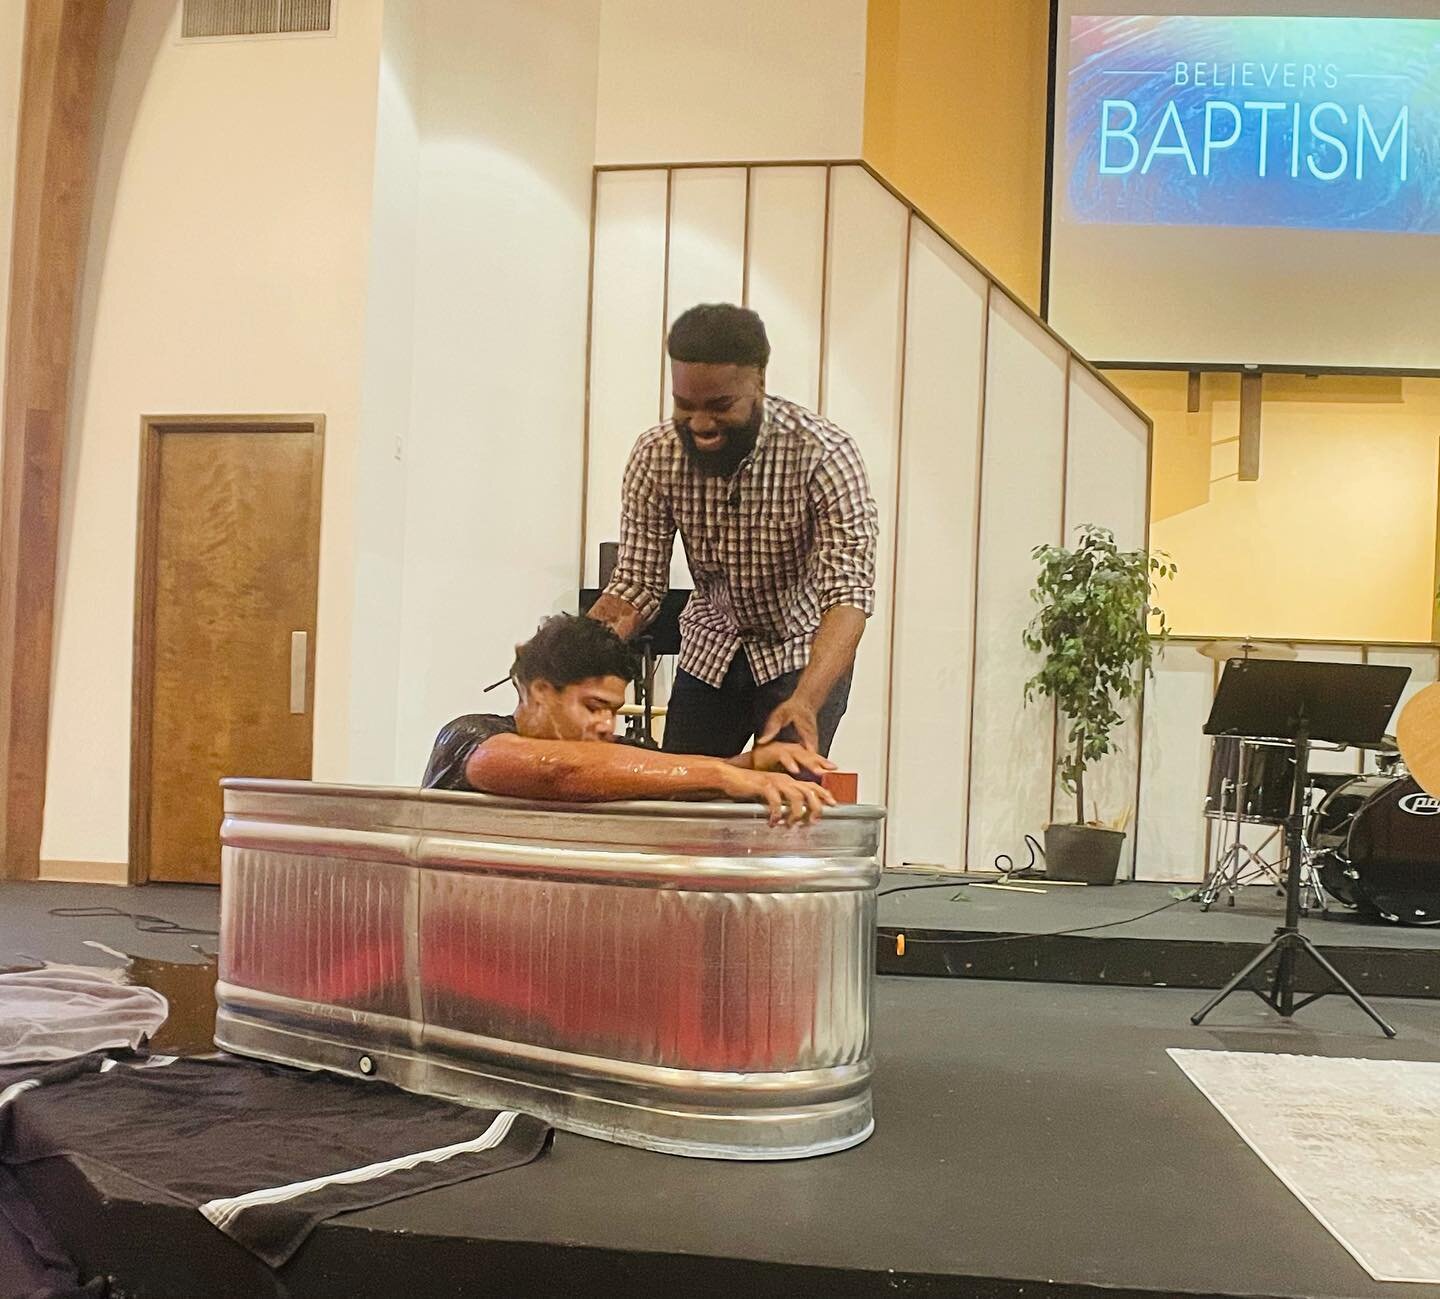 This past Sunday One Family church rejoiced as another young believer went public with his faith in believers baptism. #daytonchurhes #churchplanting #baptism #onefamilychurch #daytonchurches #church937 #gospelcenteredchurch #multiculturalchruch #chu